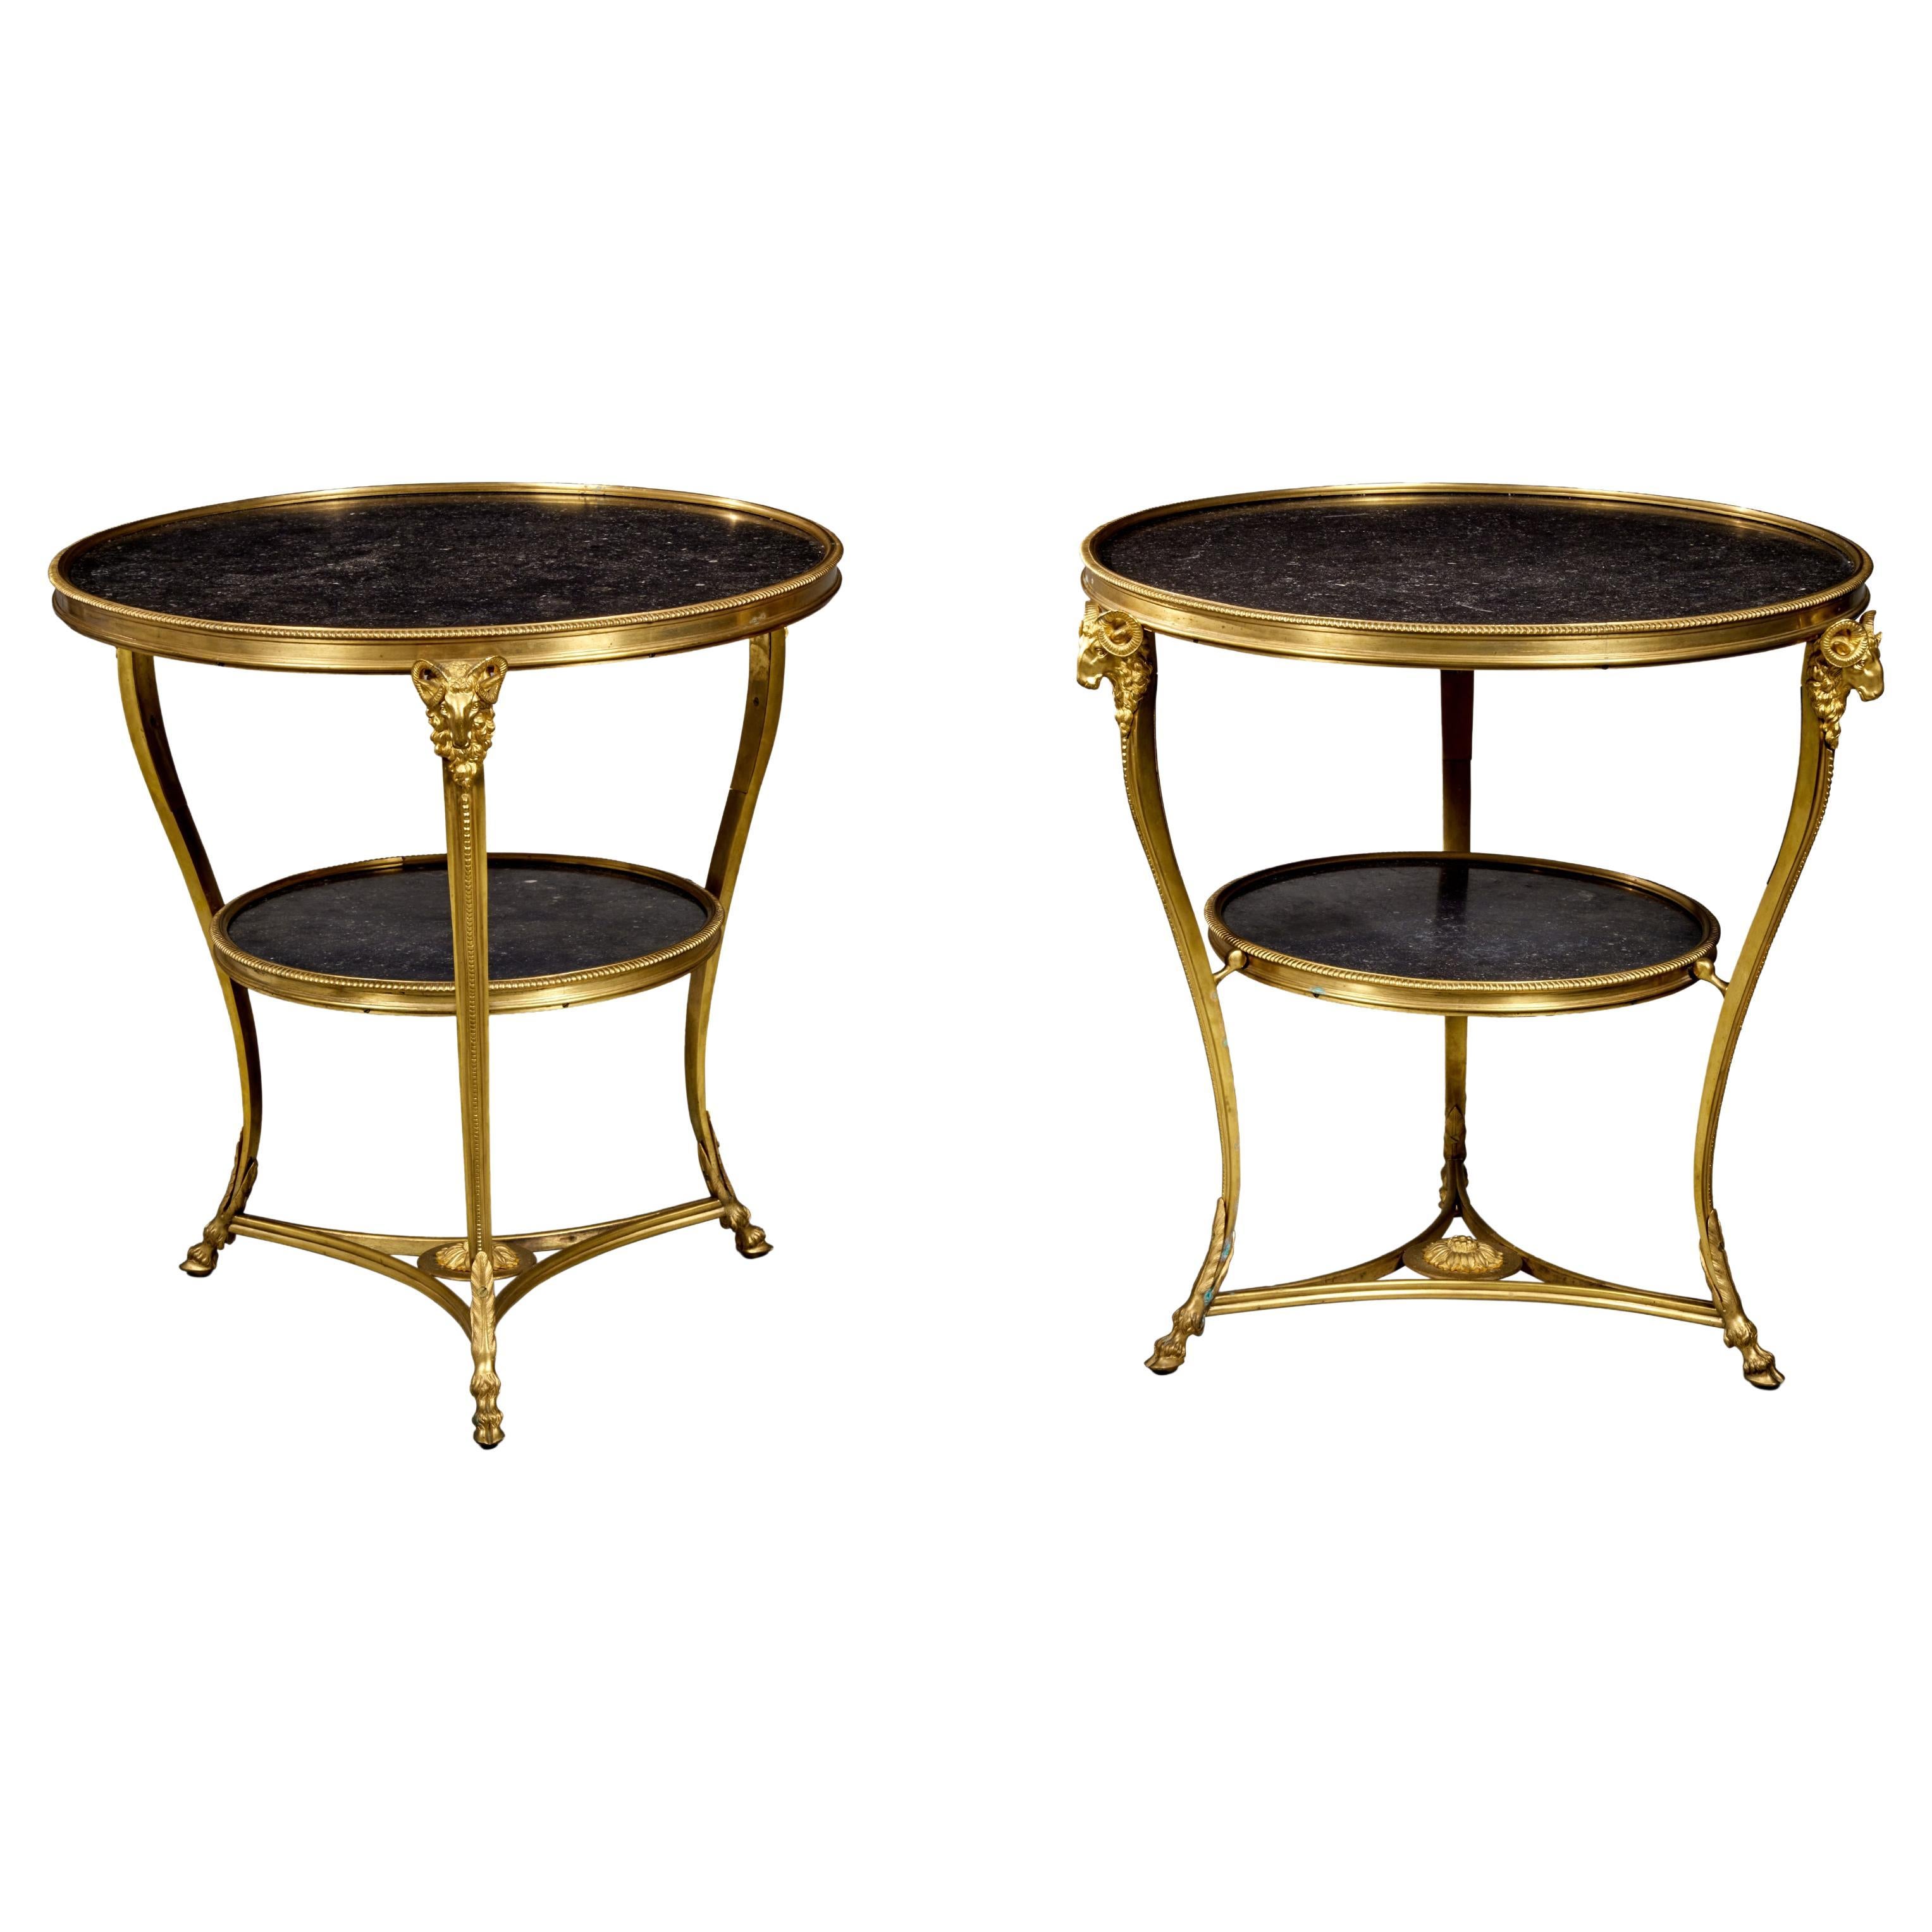 Pair of Directoire Style Gilt Bronze and Black Marble Gueridons For Sale